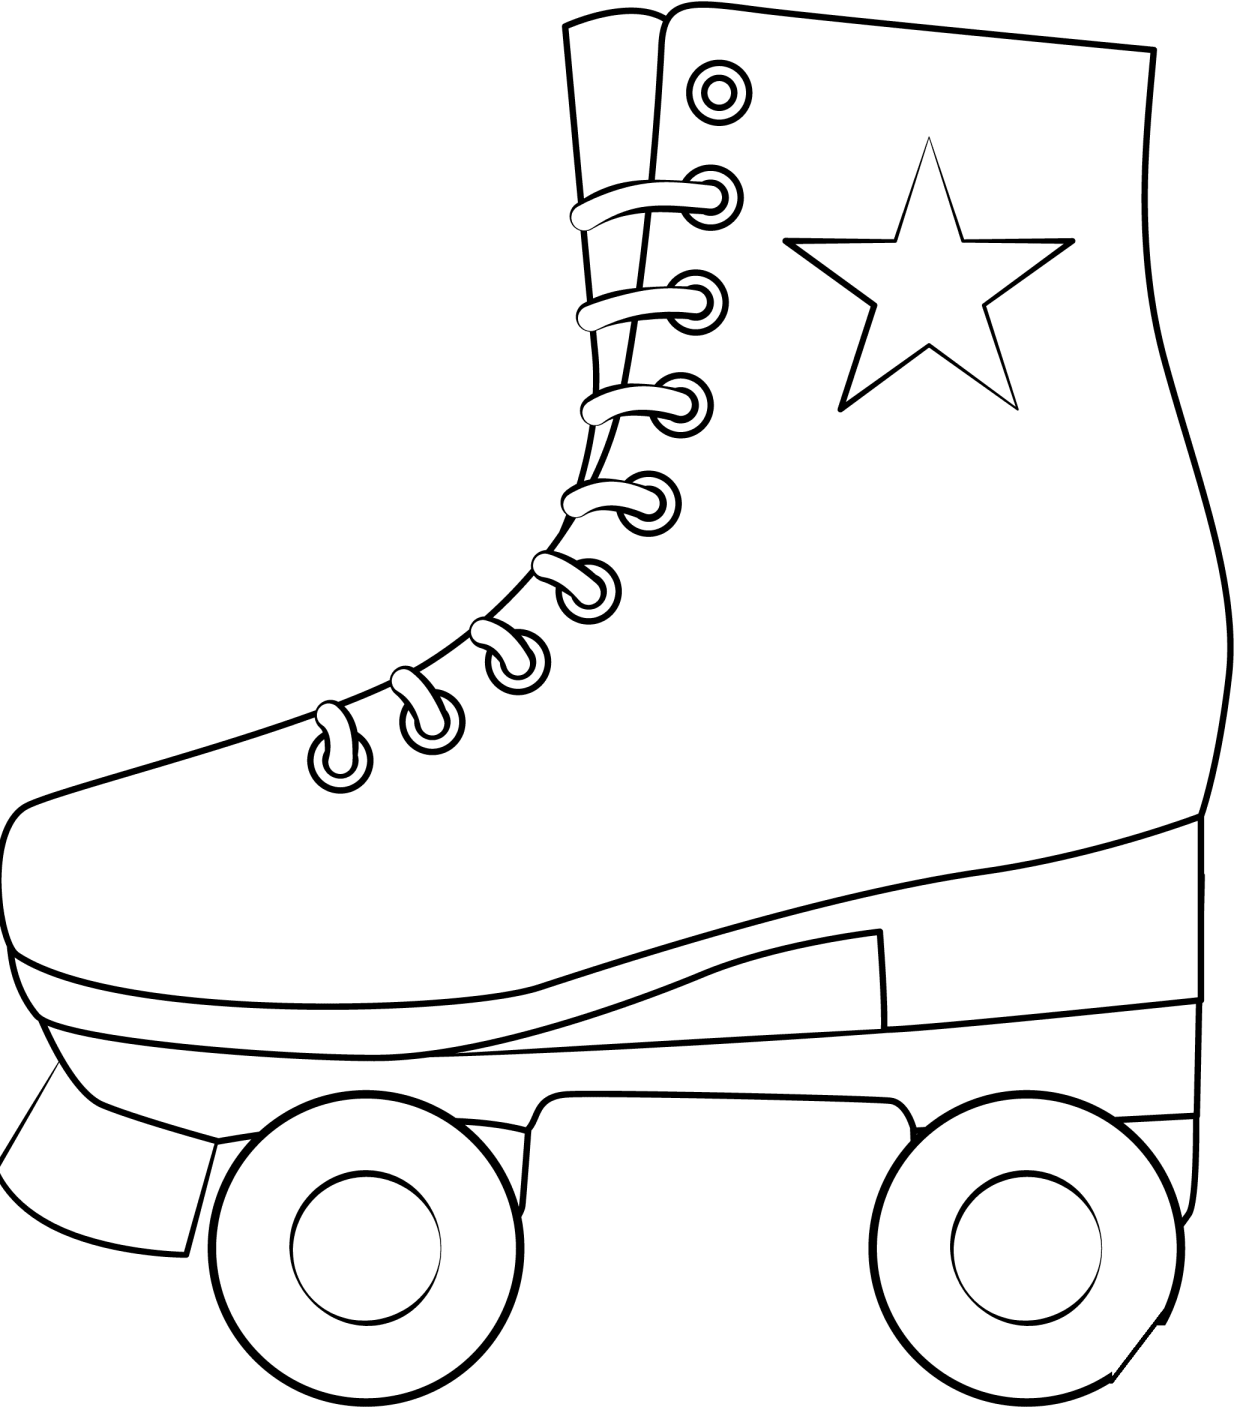 printable-roller-skate-coloring-pages-free-for-kids-and-adults